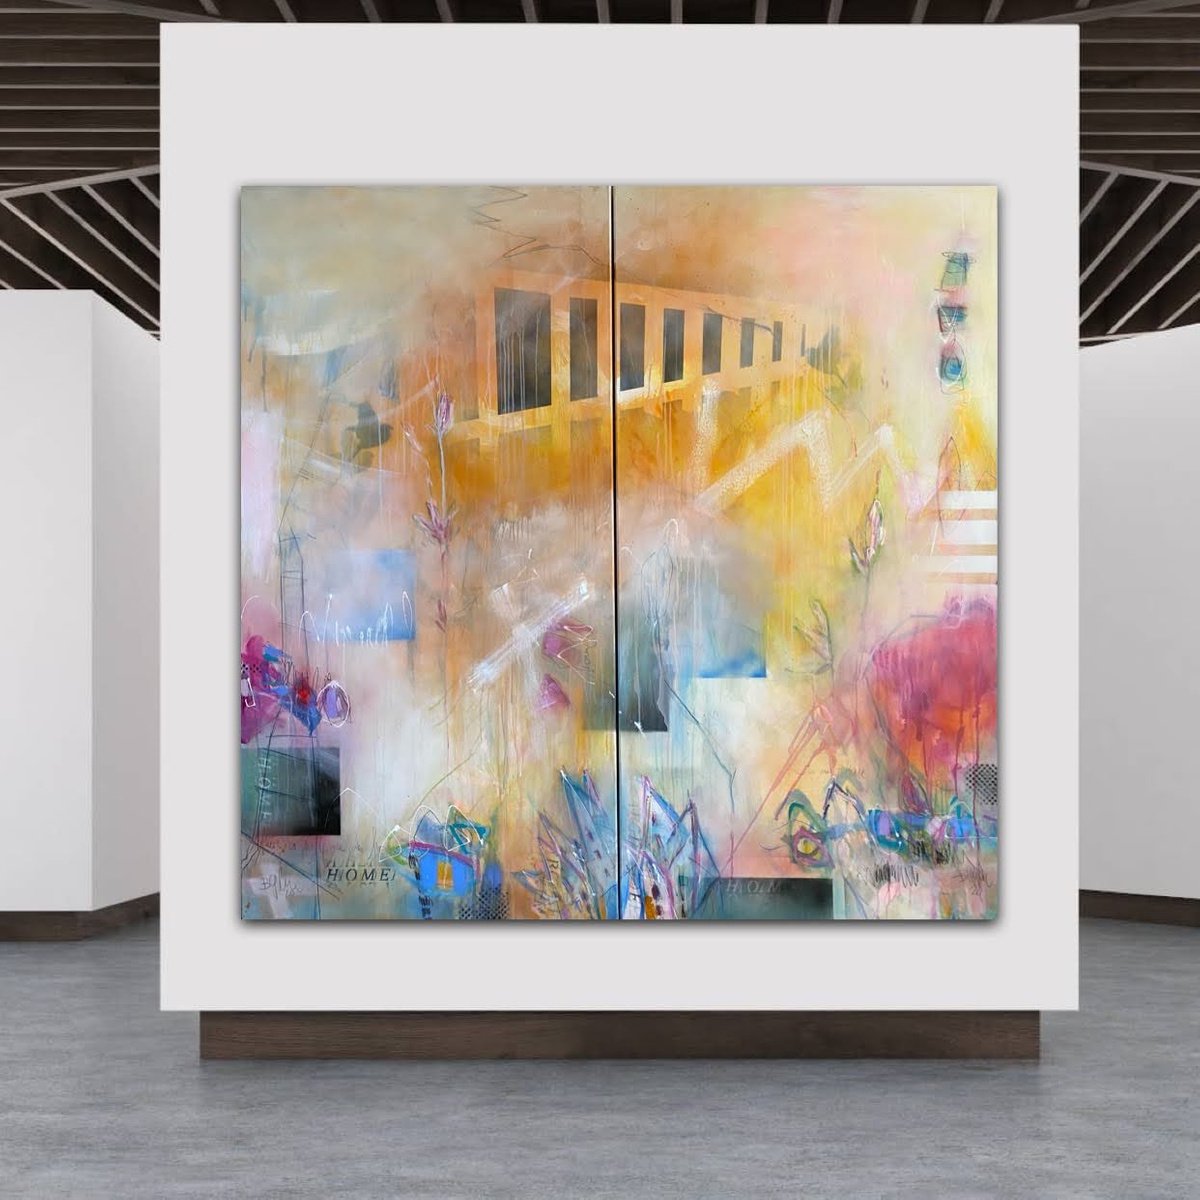 There is no place like home XXL Diptych by Bea Garding Schubert